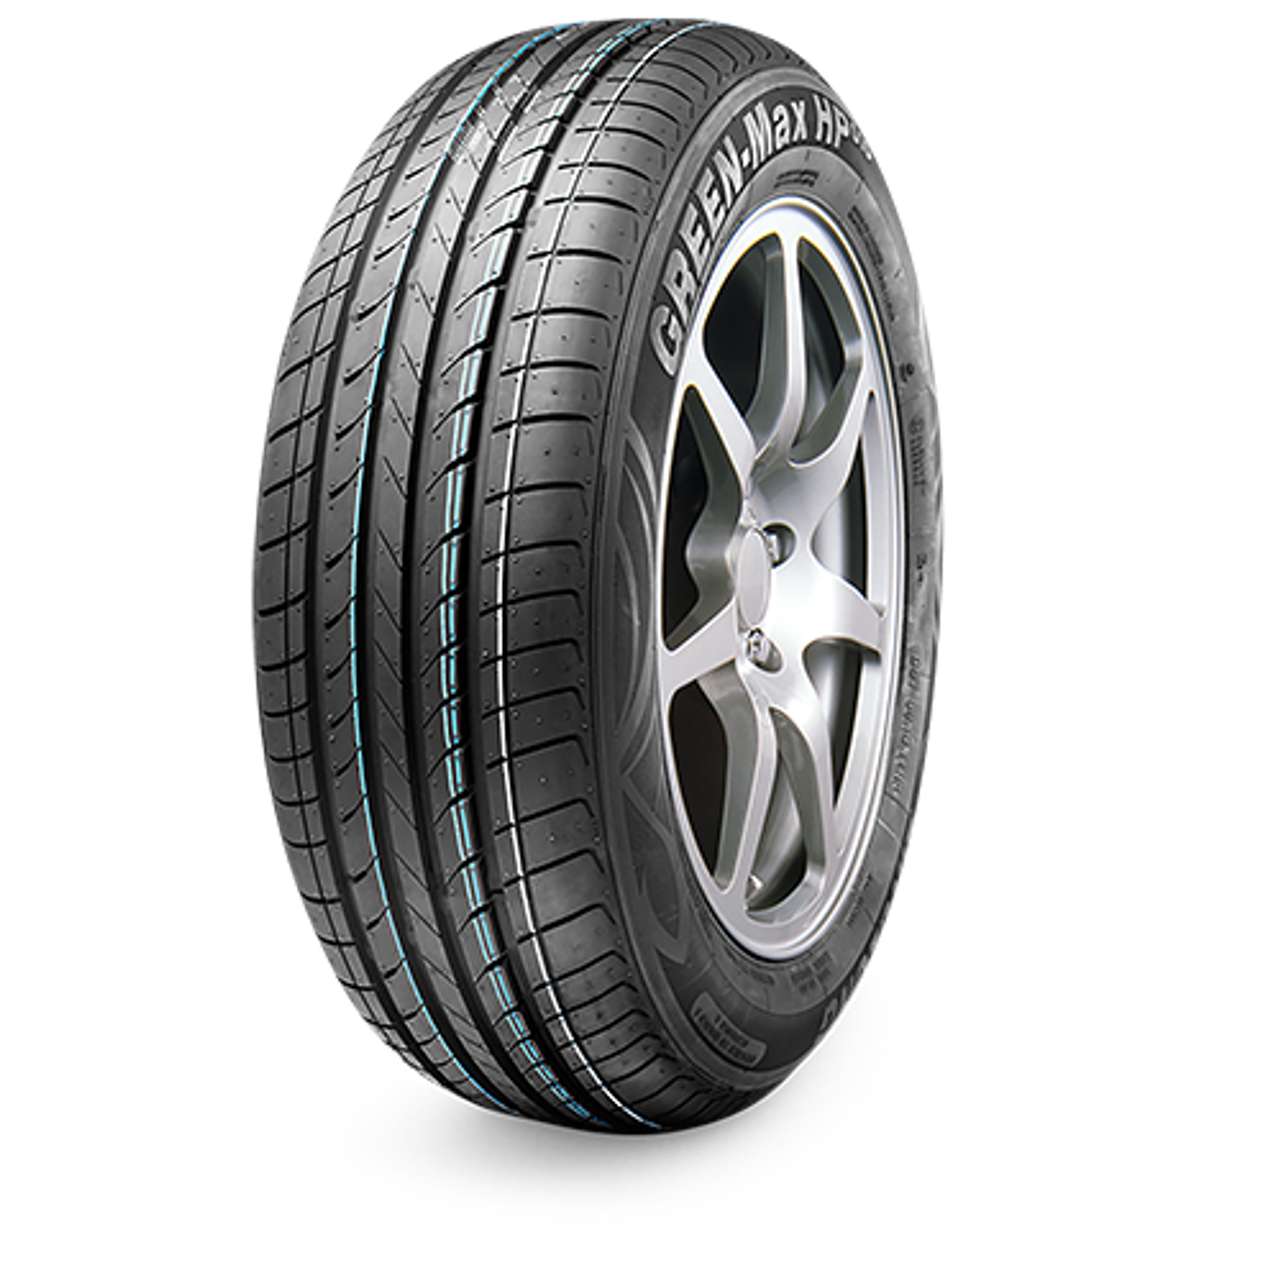 LINGLONG GREEN-MAX HP010 185/50R16 81H MFS BSW